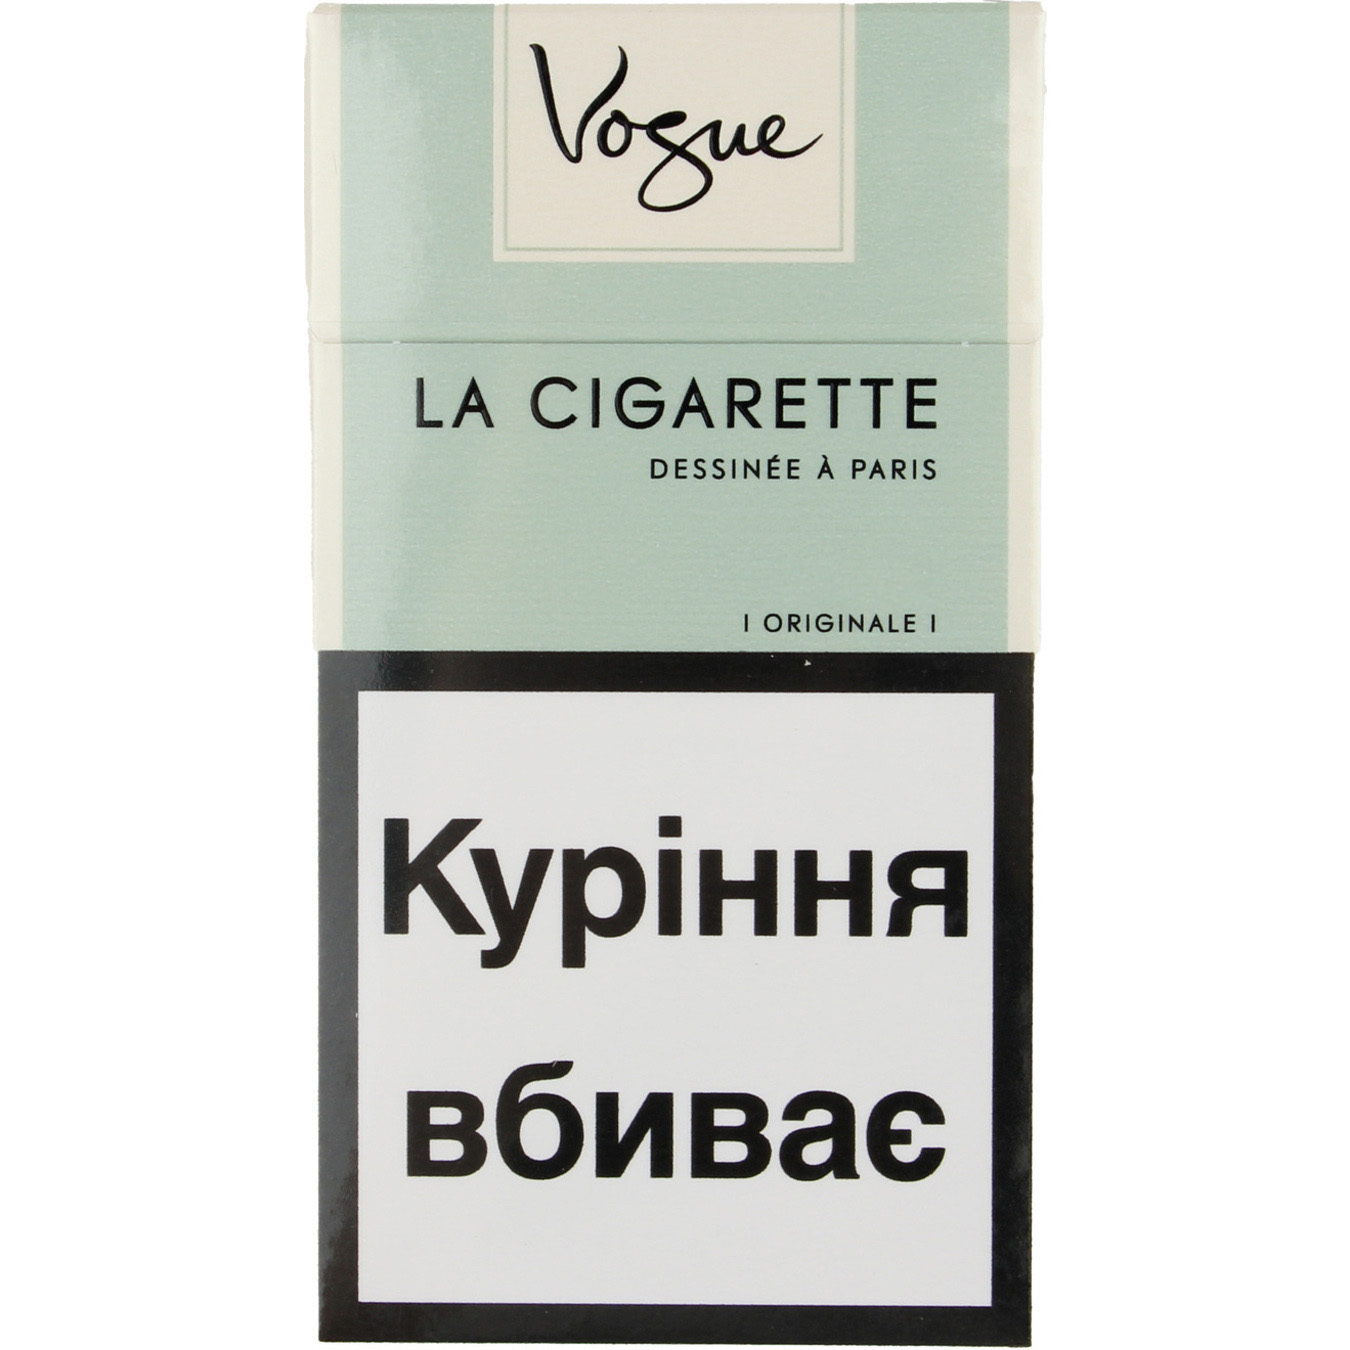 Vogue Green Cigarettes 20 pcs (the price is indicated without excise tax)